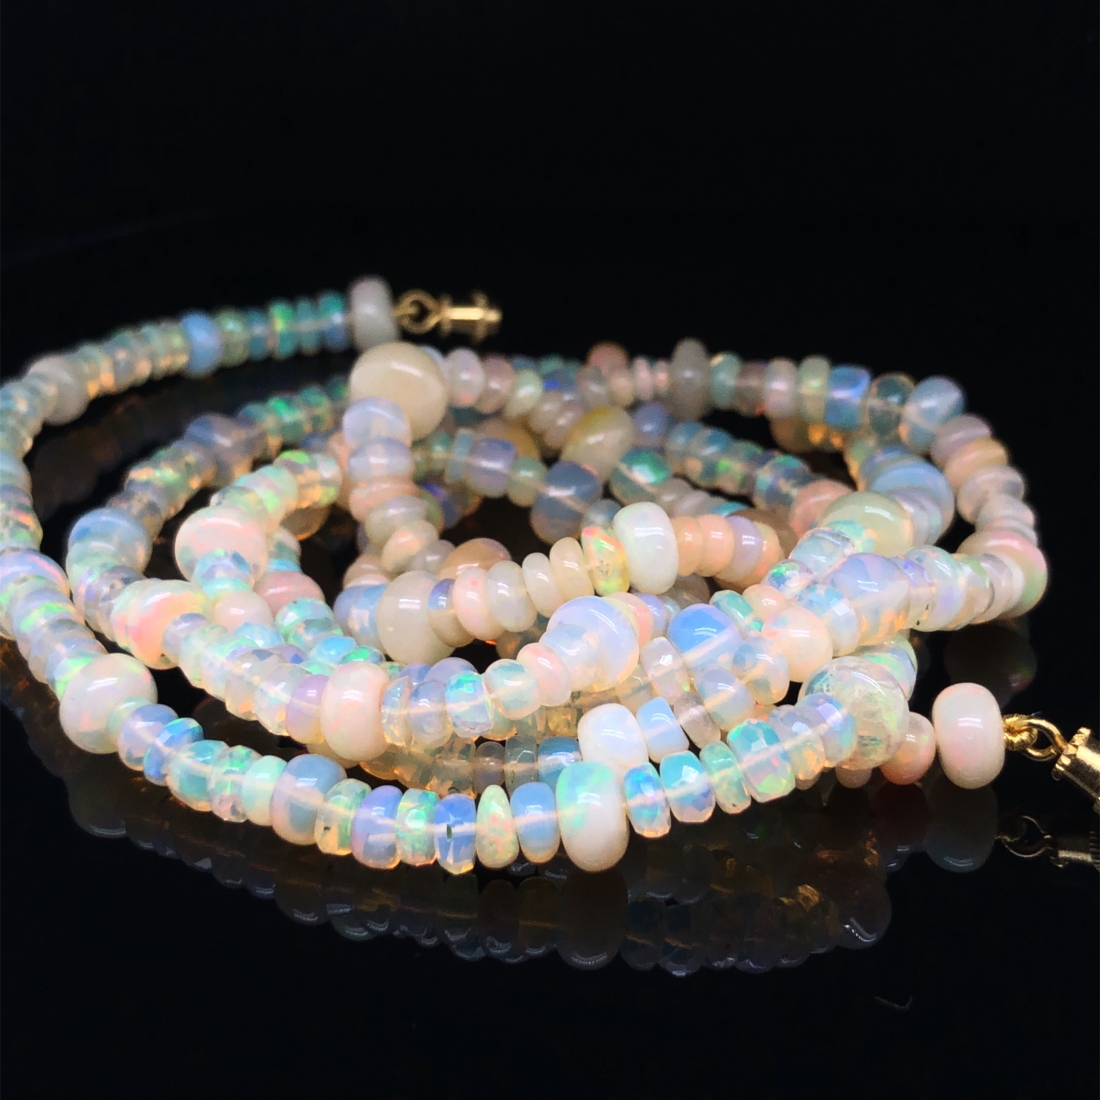 AN OPAL BEADED NECKLACE. VINTAGE OPAL ROUNDEL BEADS RECENTLY RESTRUNG. NECKLACE LENGTH 76cms. - Image 2 of 7